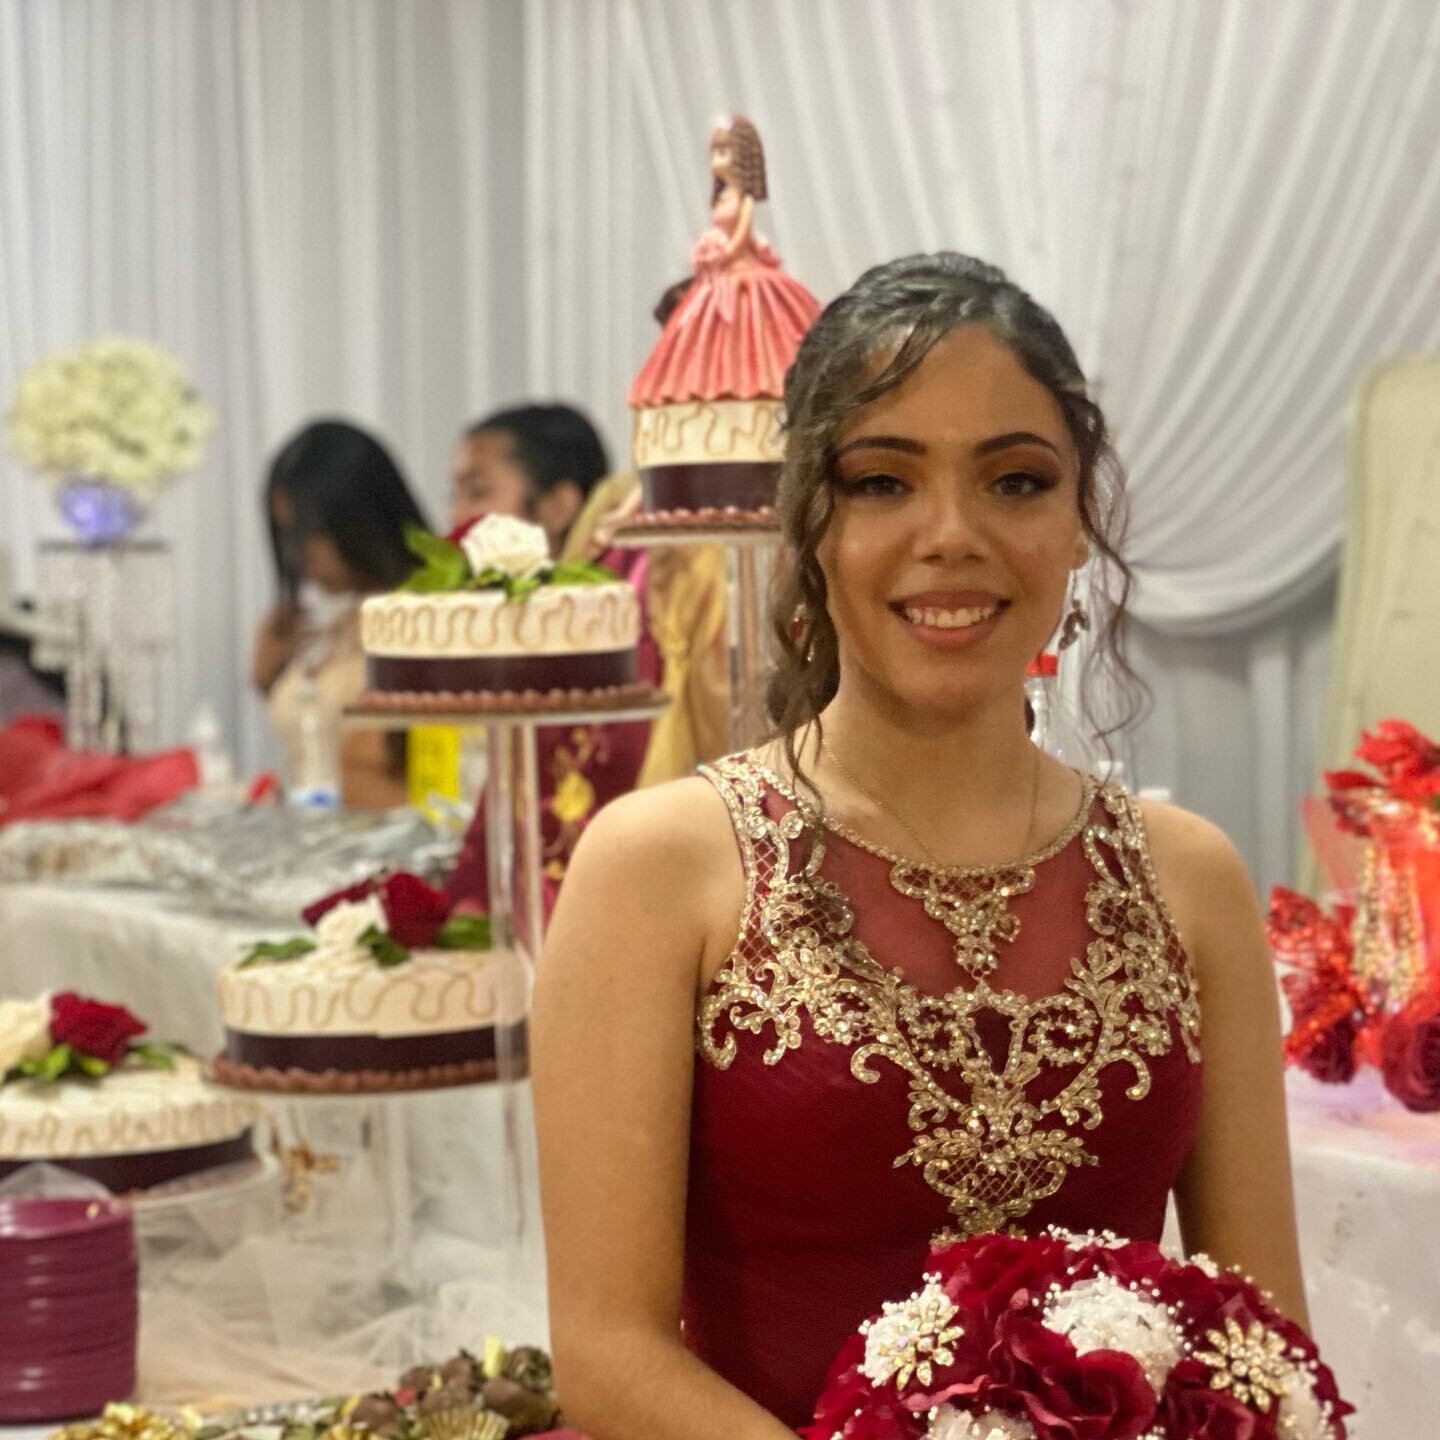 She looked so beautiful that day! We love hosting quincea&ntilde;eras. Visit the link in our bio for more info. We are booking fast!